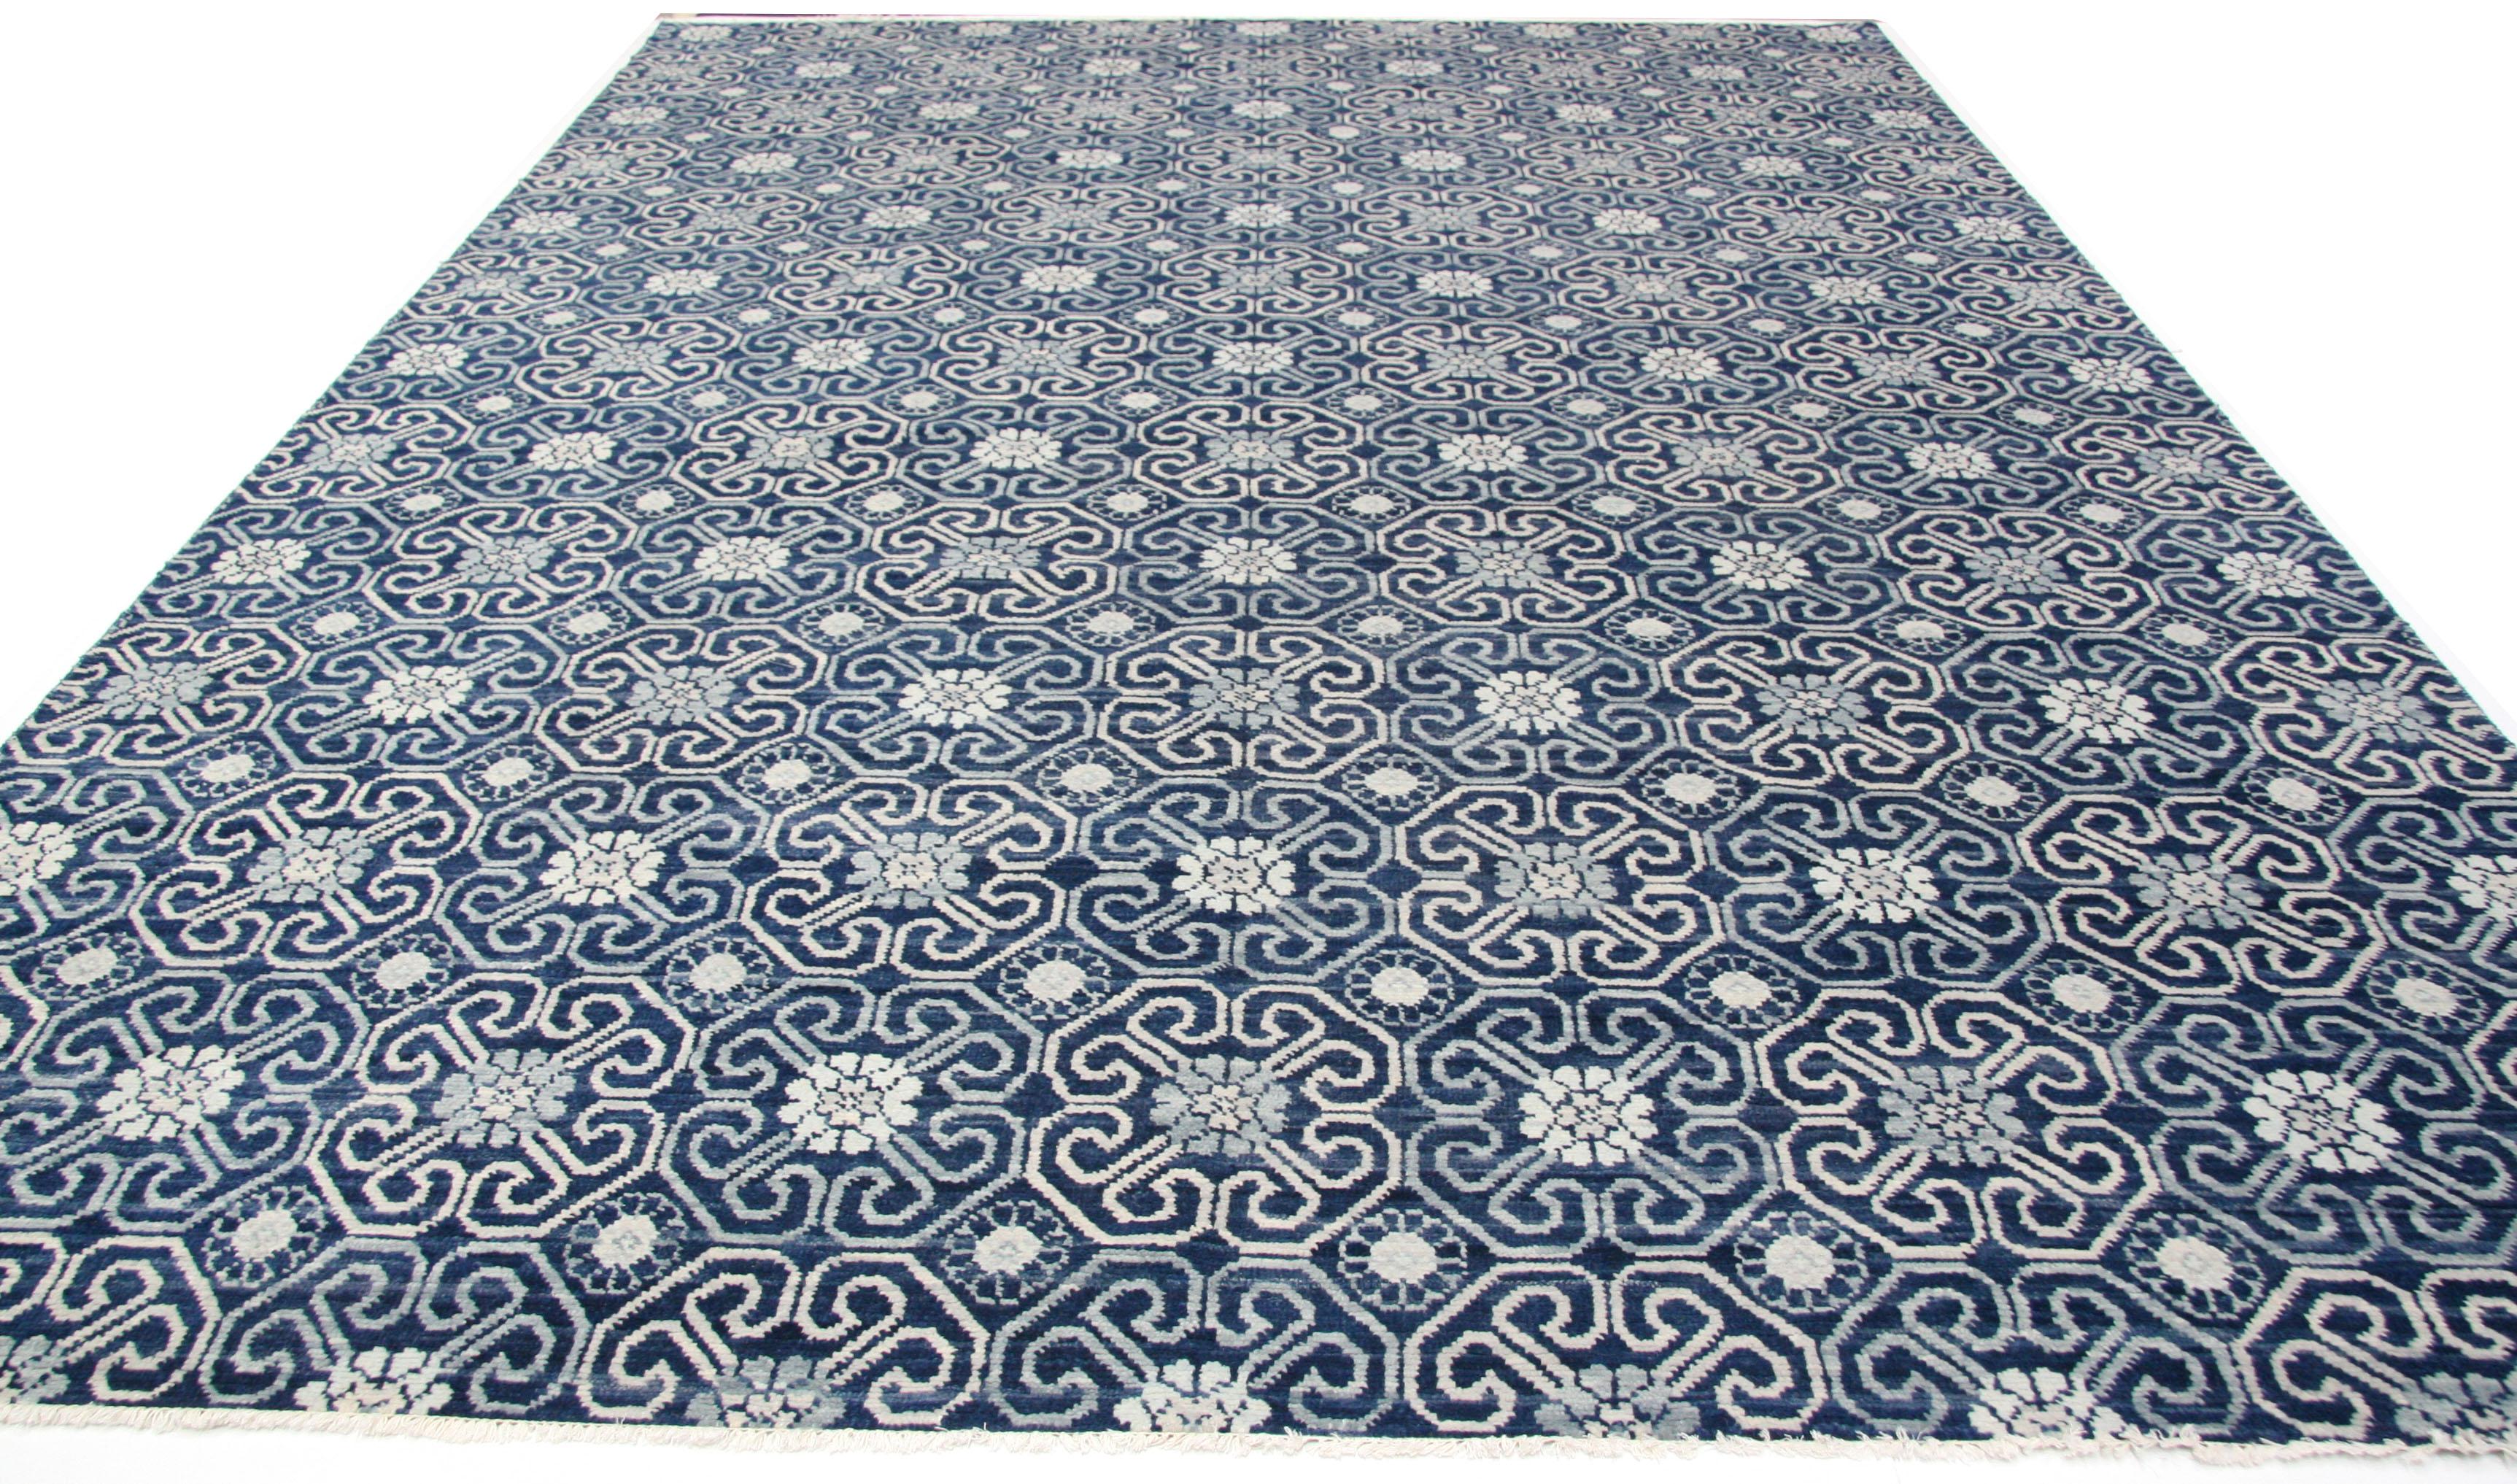 Geometric floral all-over pattern rug. Hand knotted wool, made in India using natural vegetal dyes. A charming contemporary rug for the modern home or office. Measure: 10 x 14.